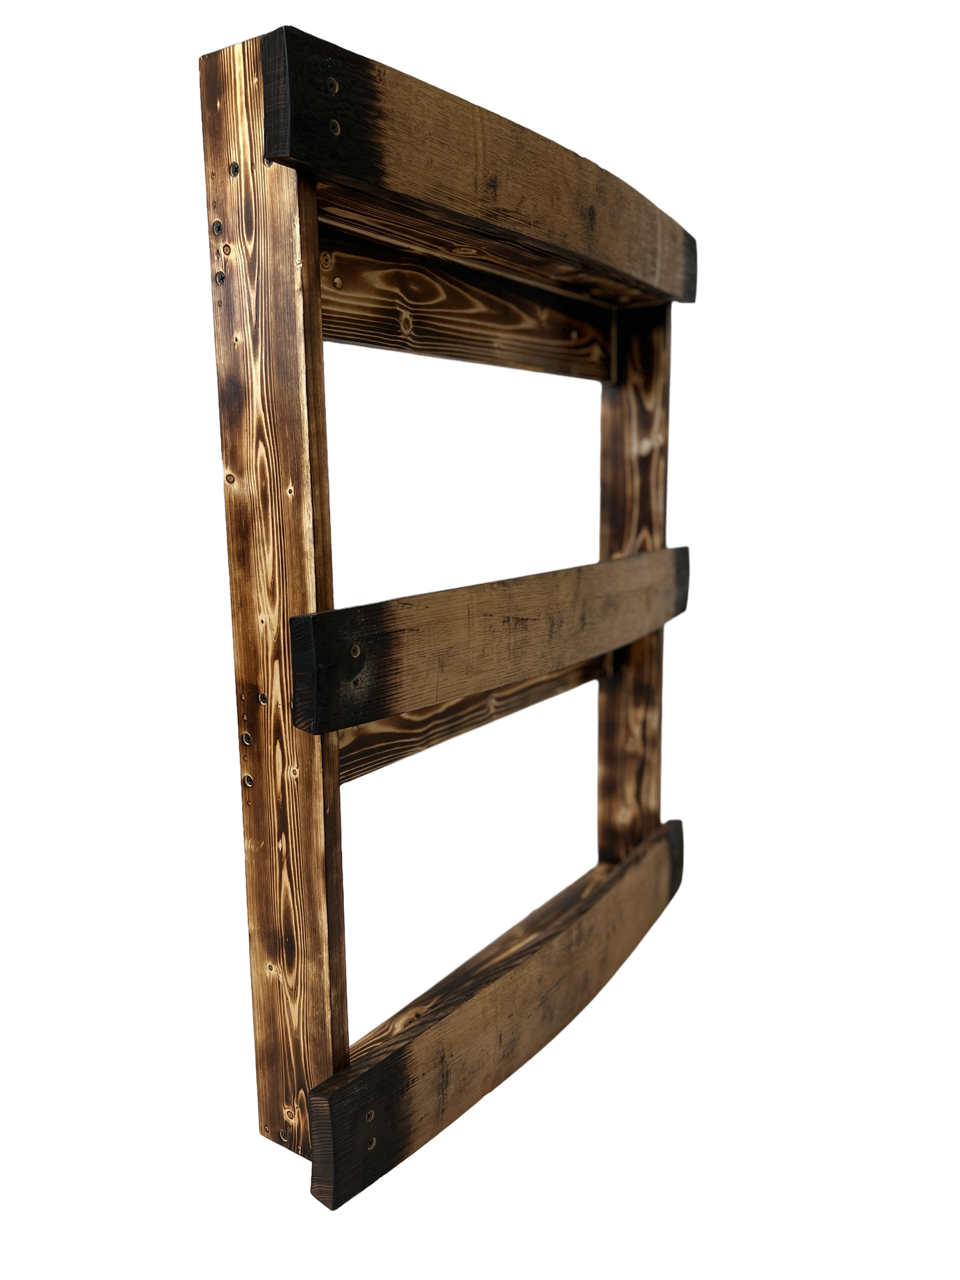 The Torched Barrel Bourbon/Whiskey Stave Shelf, Large Torched Three-Tier Liquor Bottle Display Cabinet, Wall Mount, Easy Installation